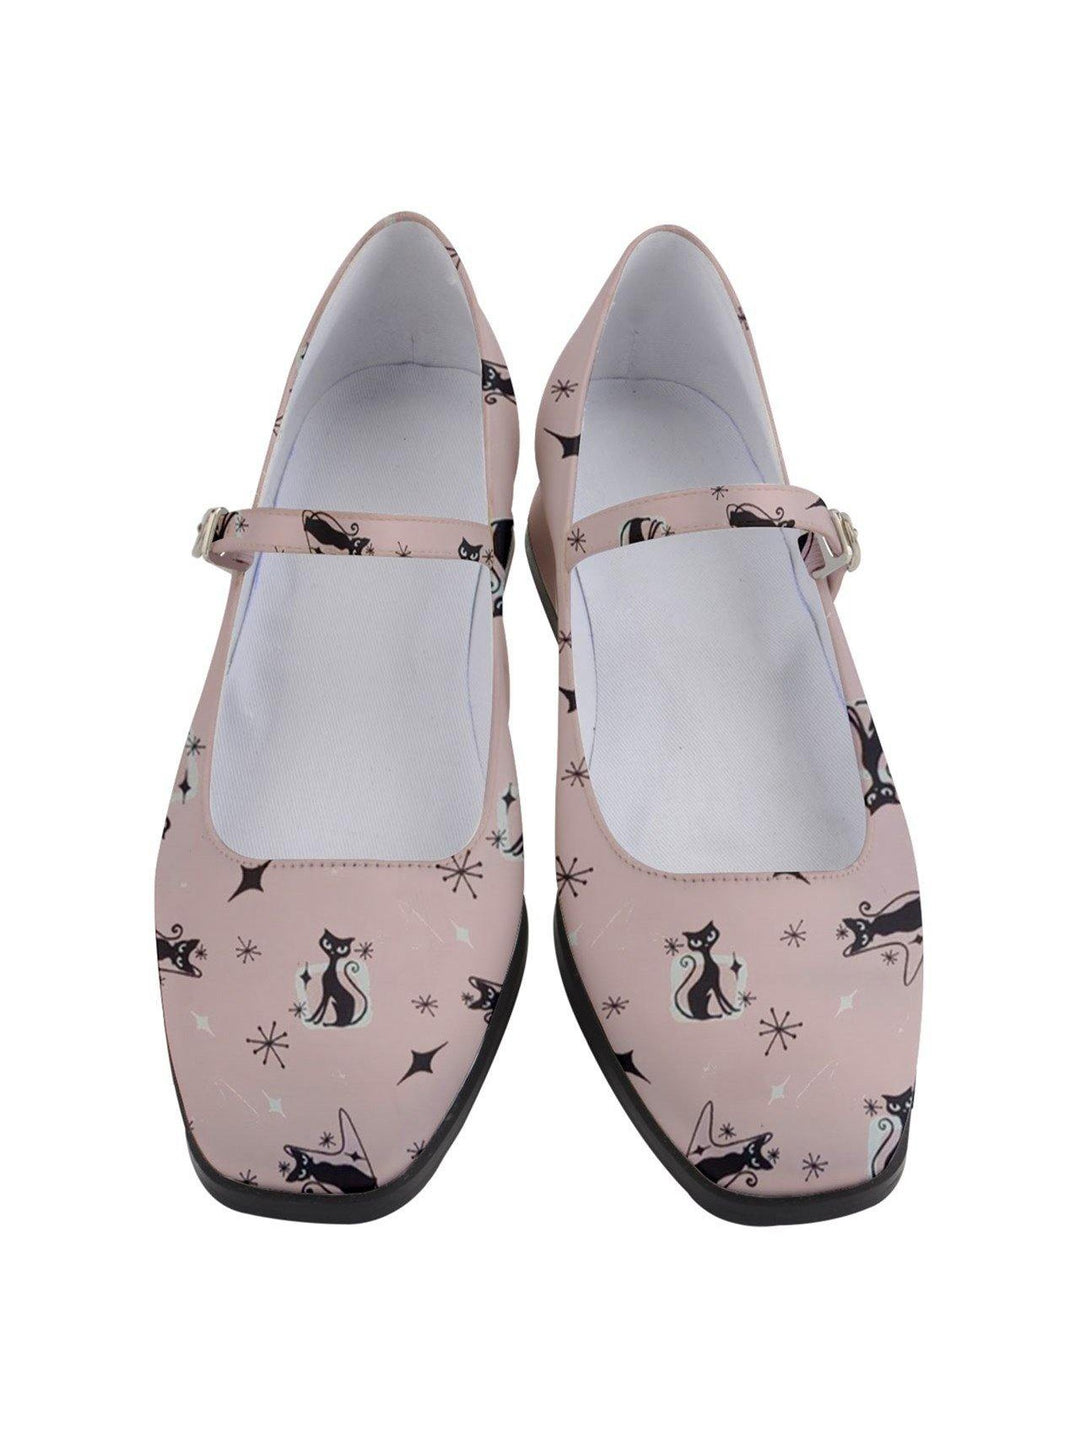 What's New Pussycat Women's Mary Jane Shoes